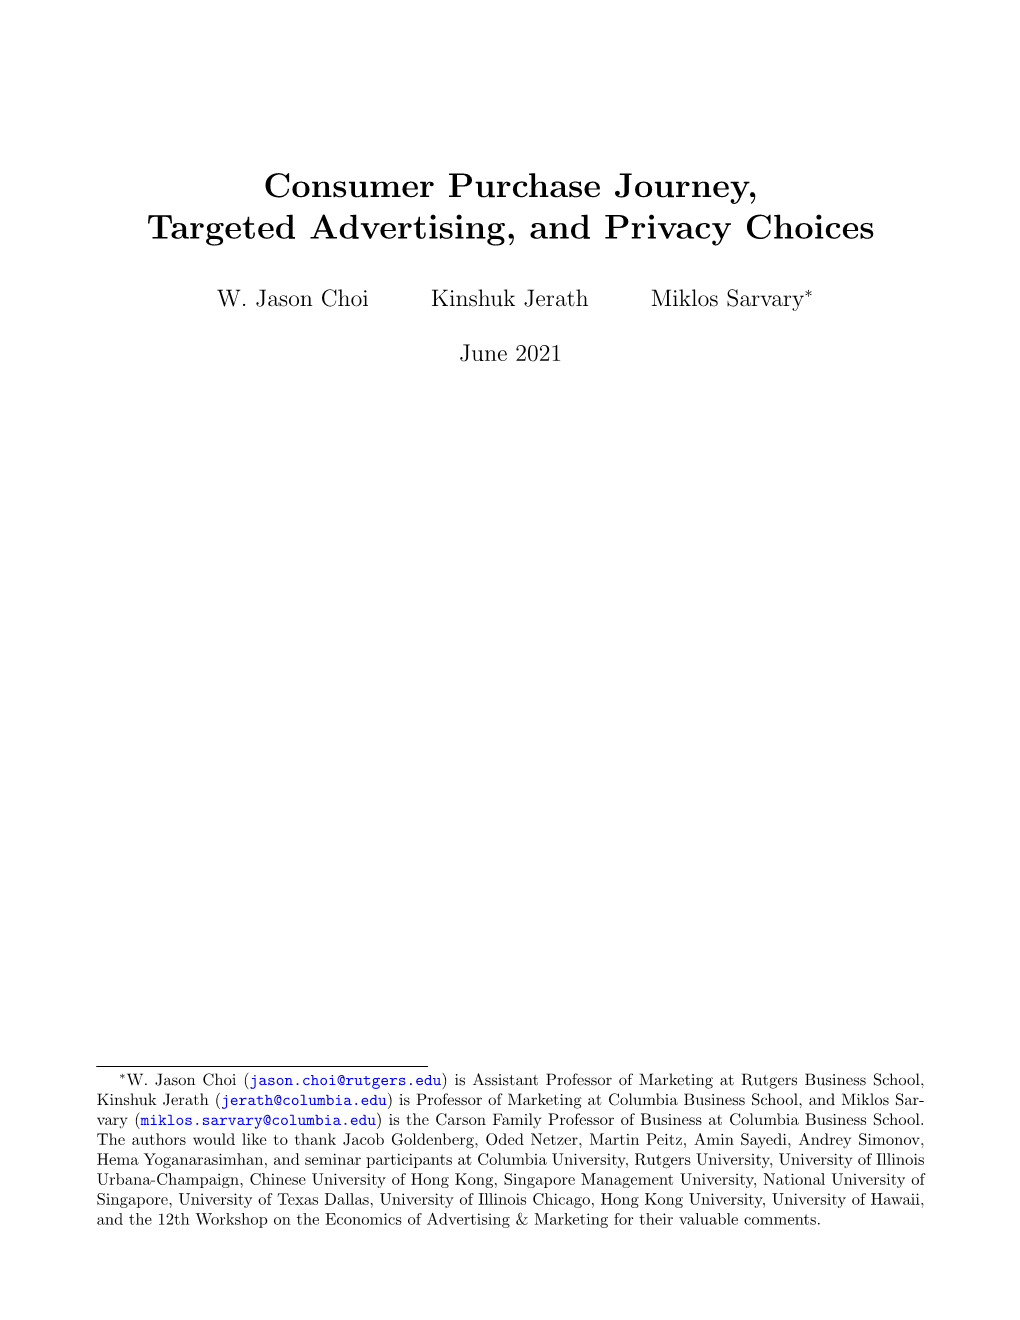 Consumer Purchase Journey, Targeted Advertising, and Privacy Choices